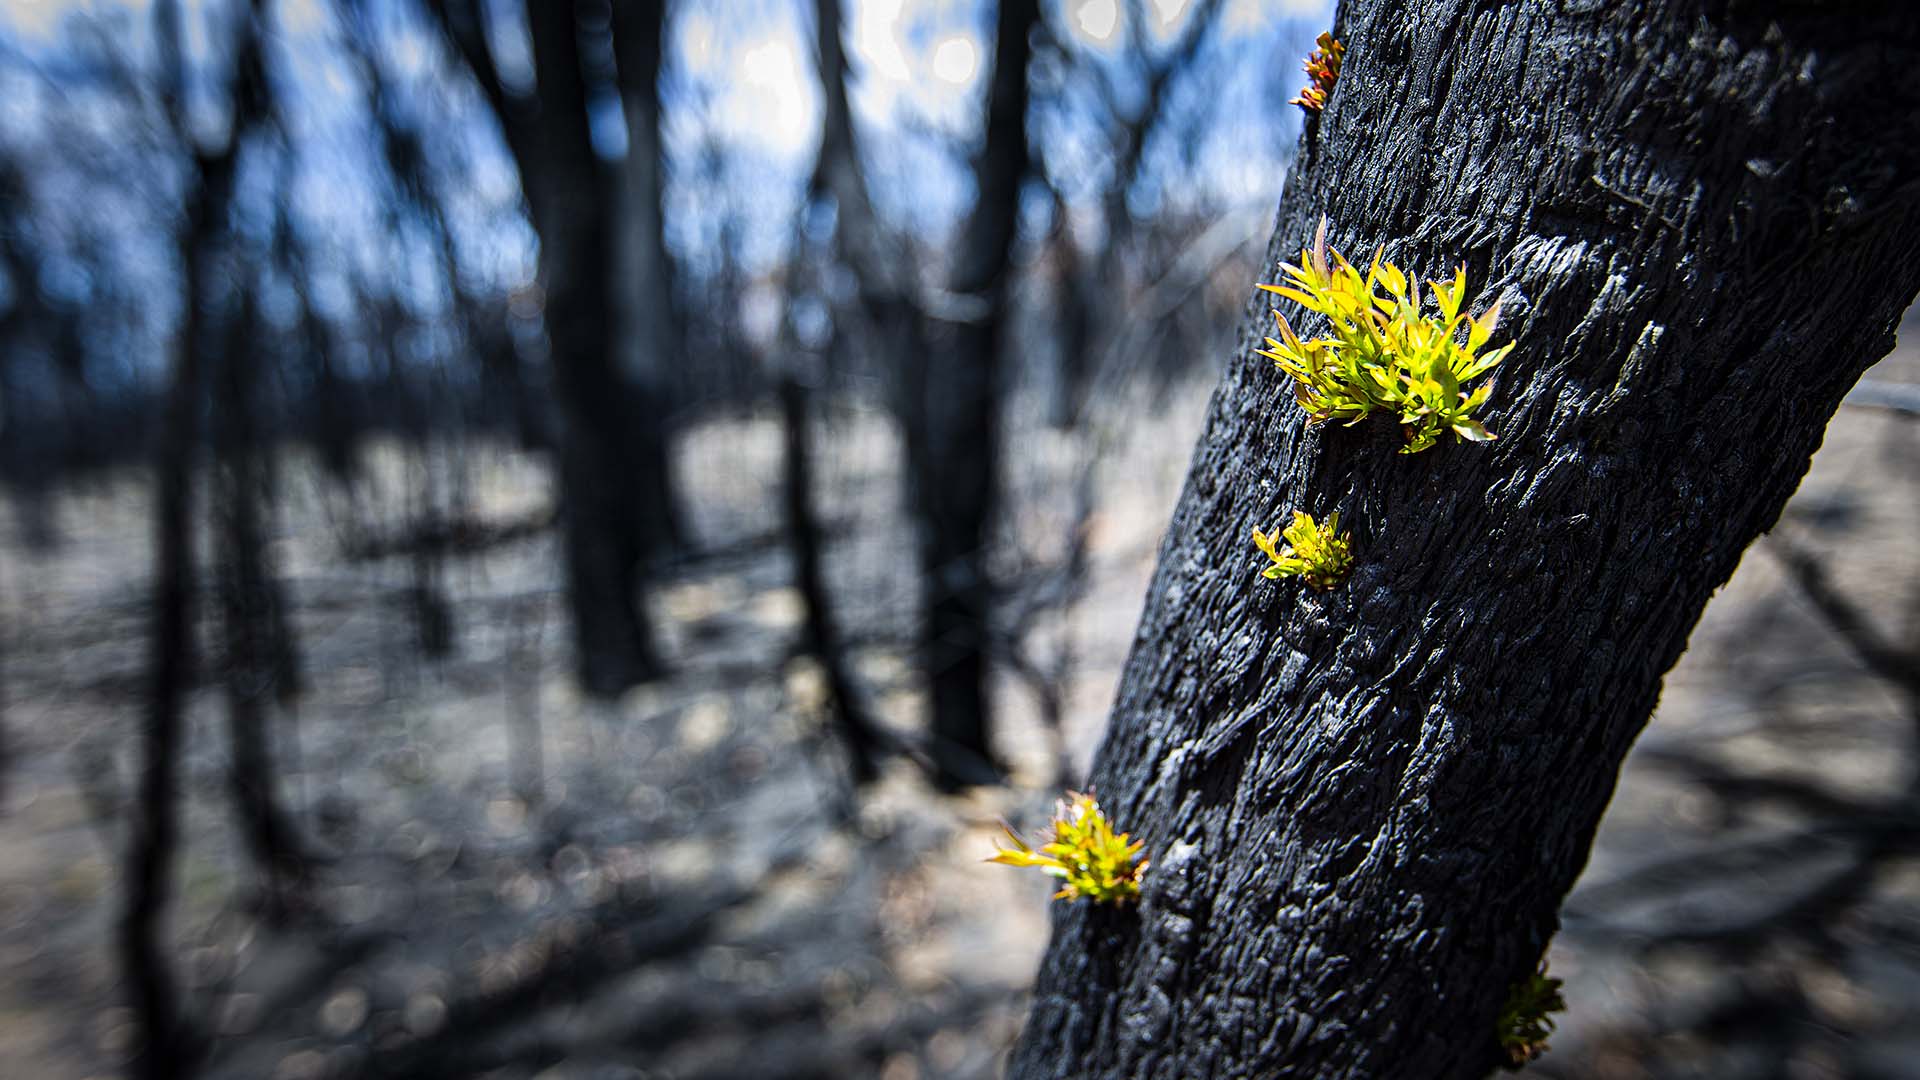 UOW to prioritise bushfire recovery research - Mirage News